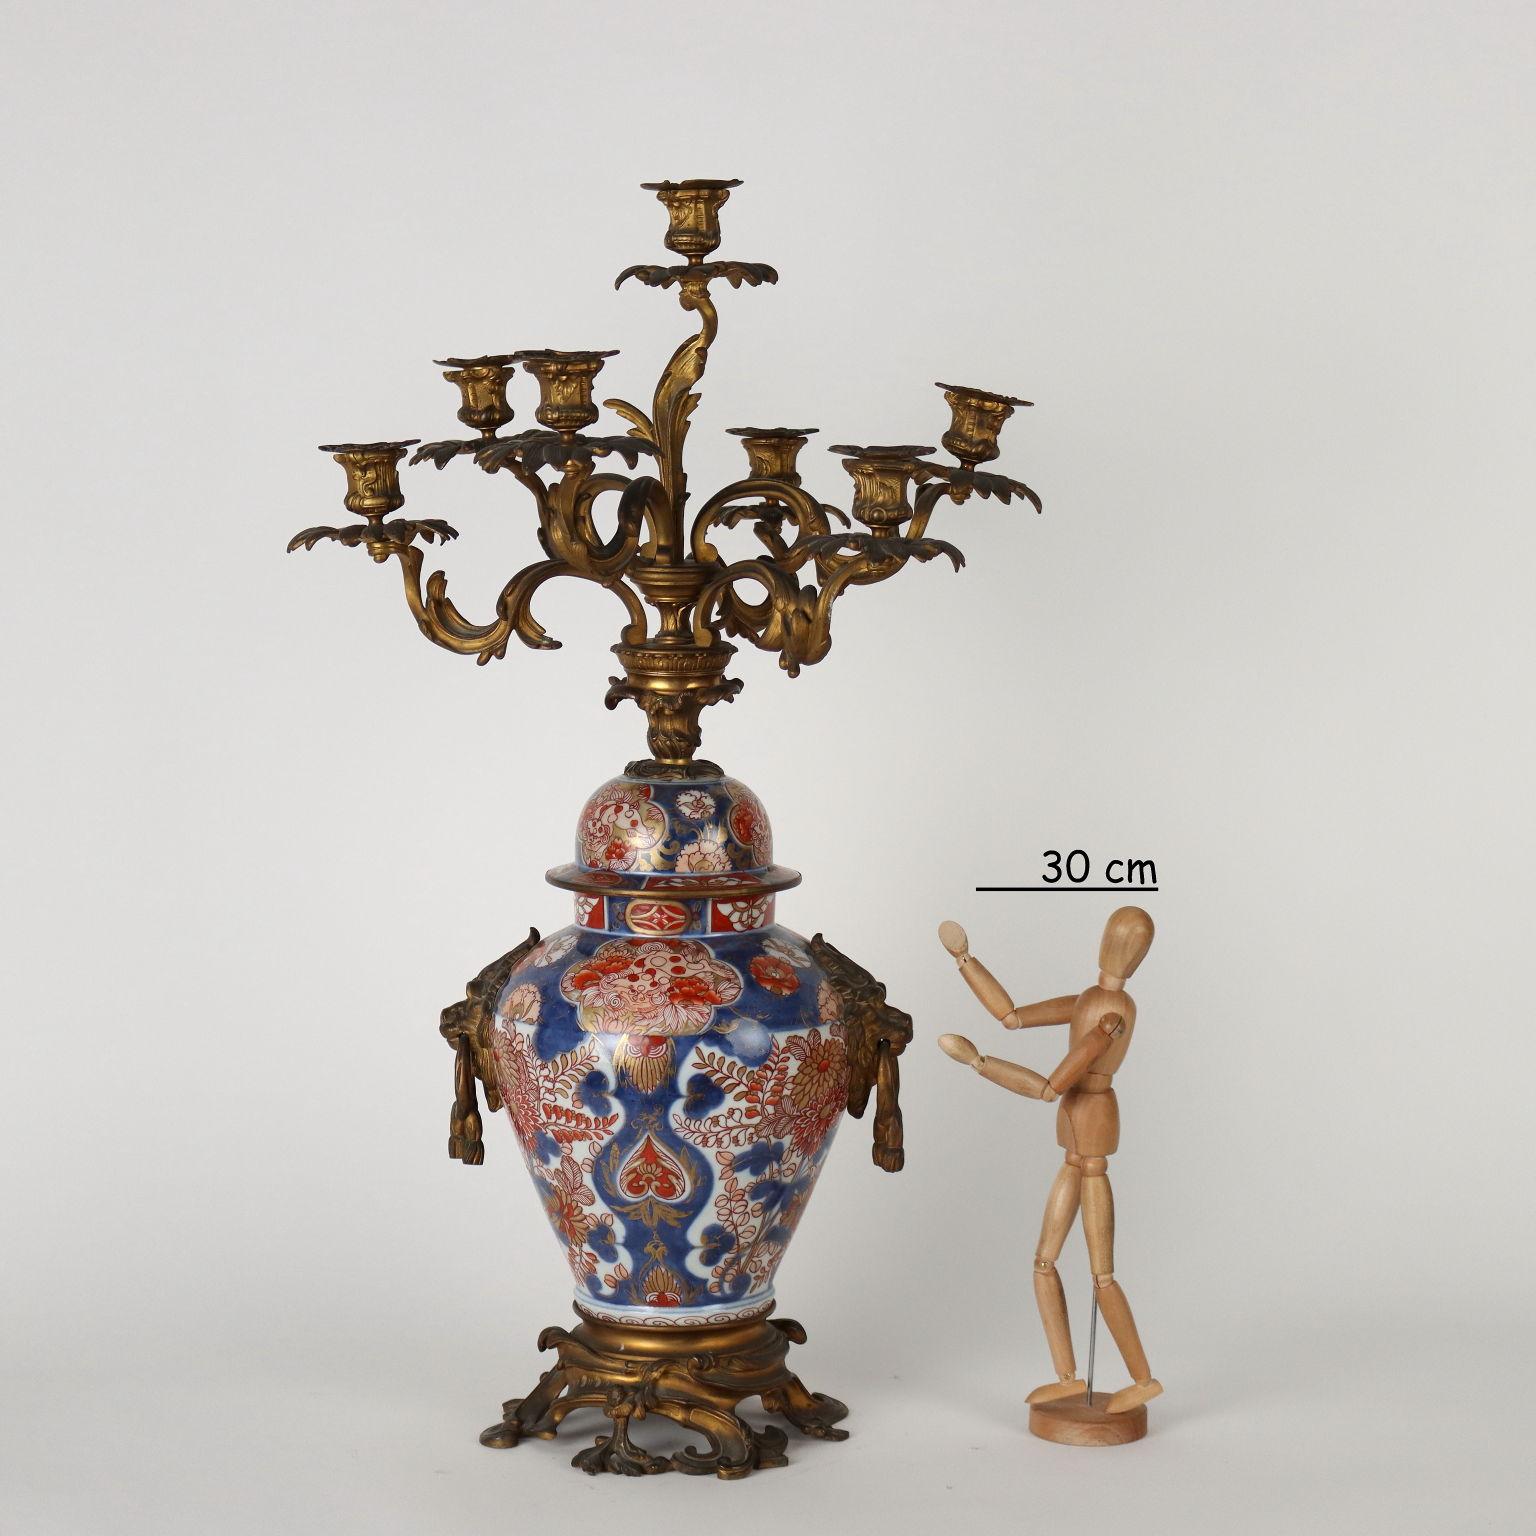 Imari porcelain vase with gilt bronze mounts with candlestick function. The vase painted in blue below has polychrome enamel decorations of plants, flowers and Shishi lions within reserves. Base in gilded bronze with rocaille and lion handles on the